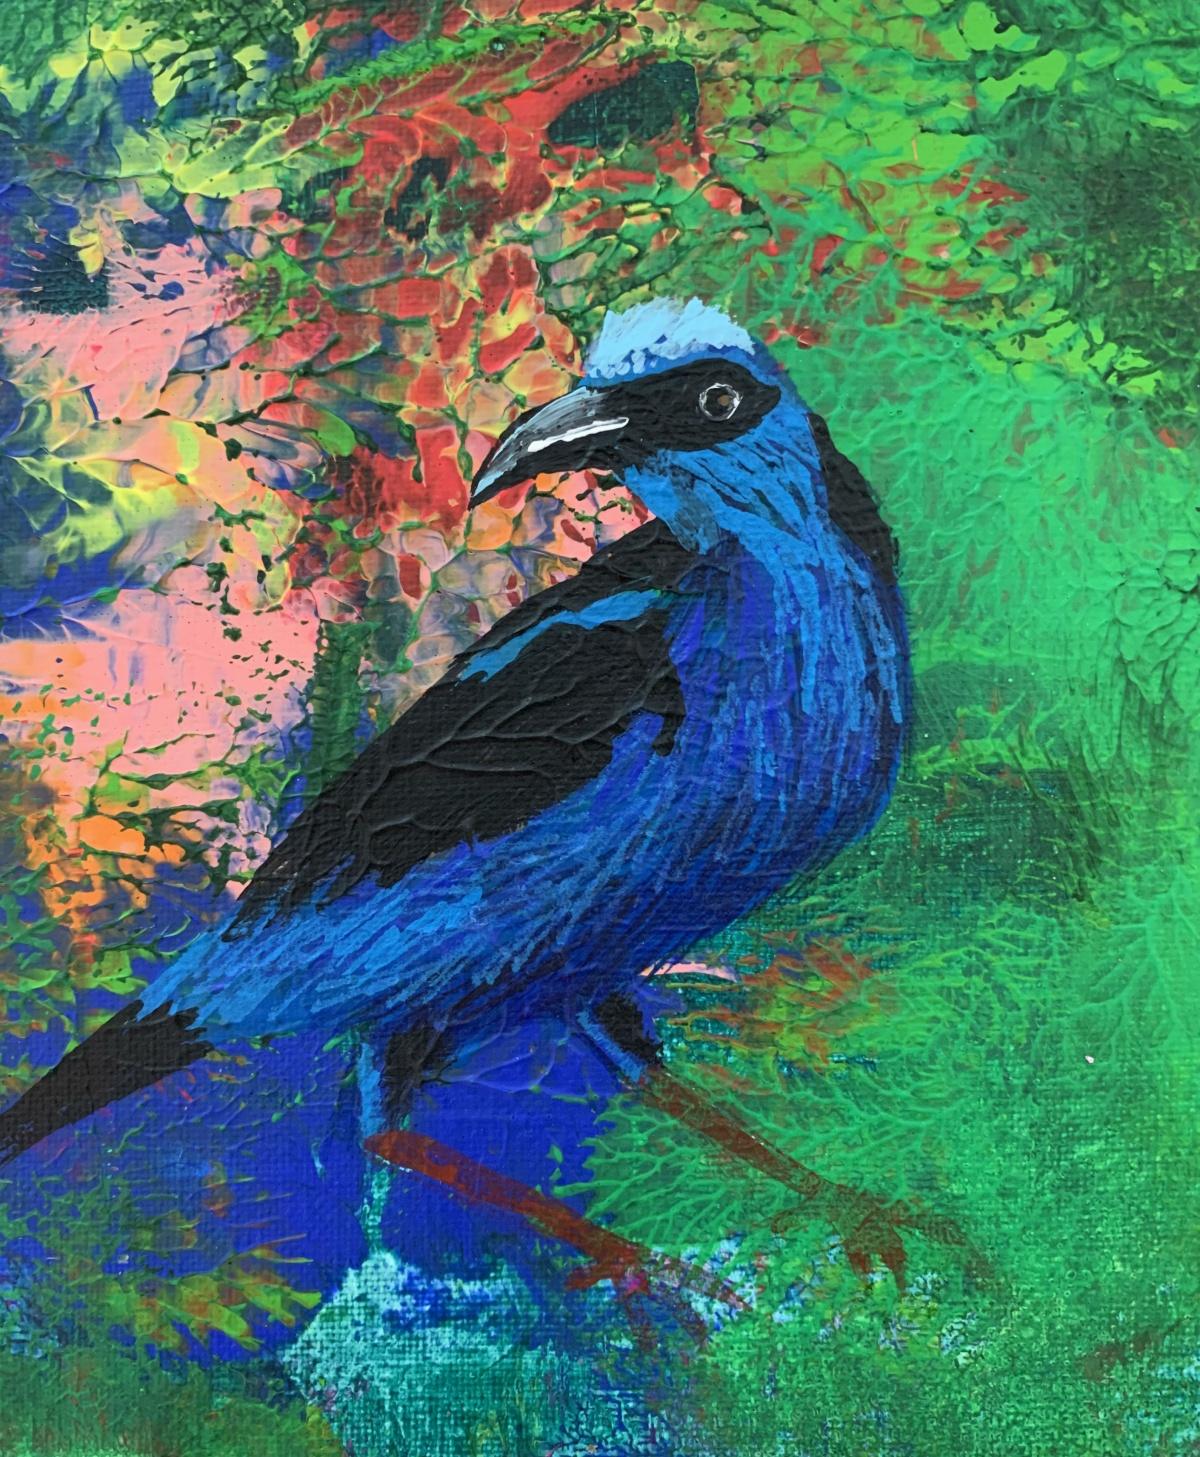 Gardens of Delight XLIII - XXI century figurative oil painting, Bird, Colorful - Contemporary Painting by Magdalena Nałęcz